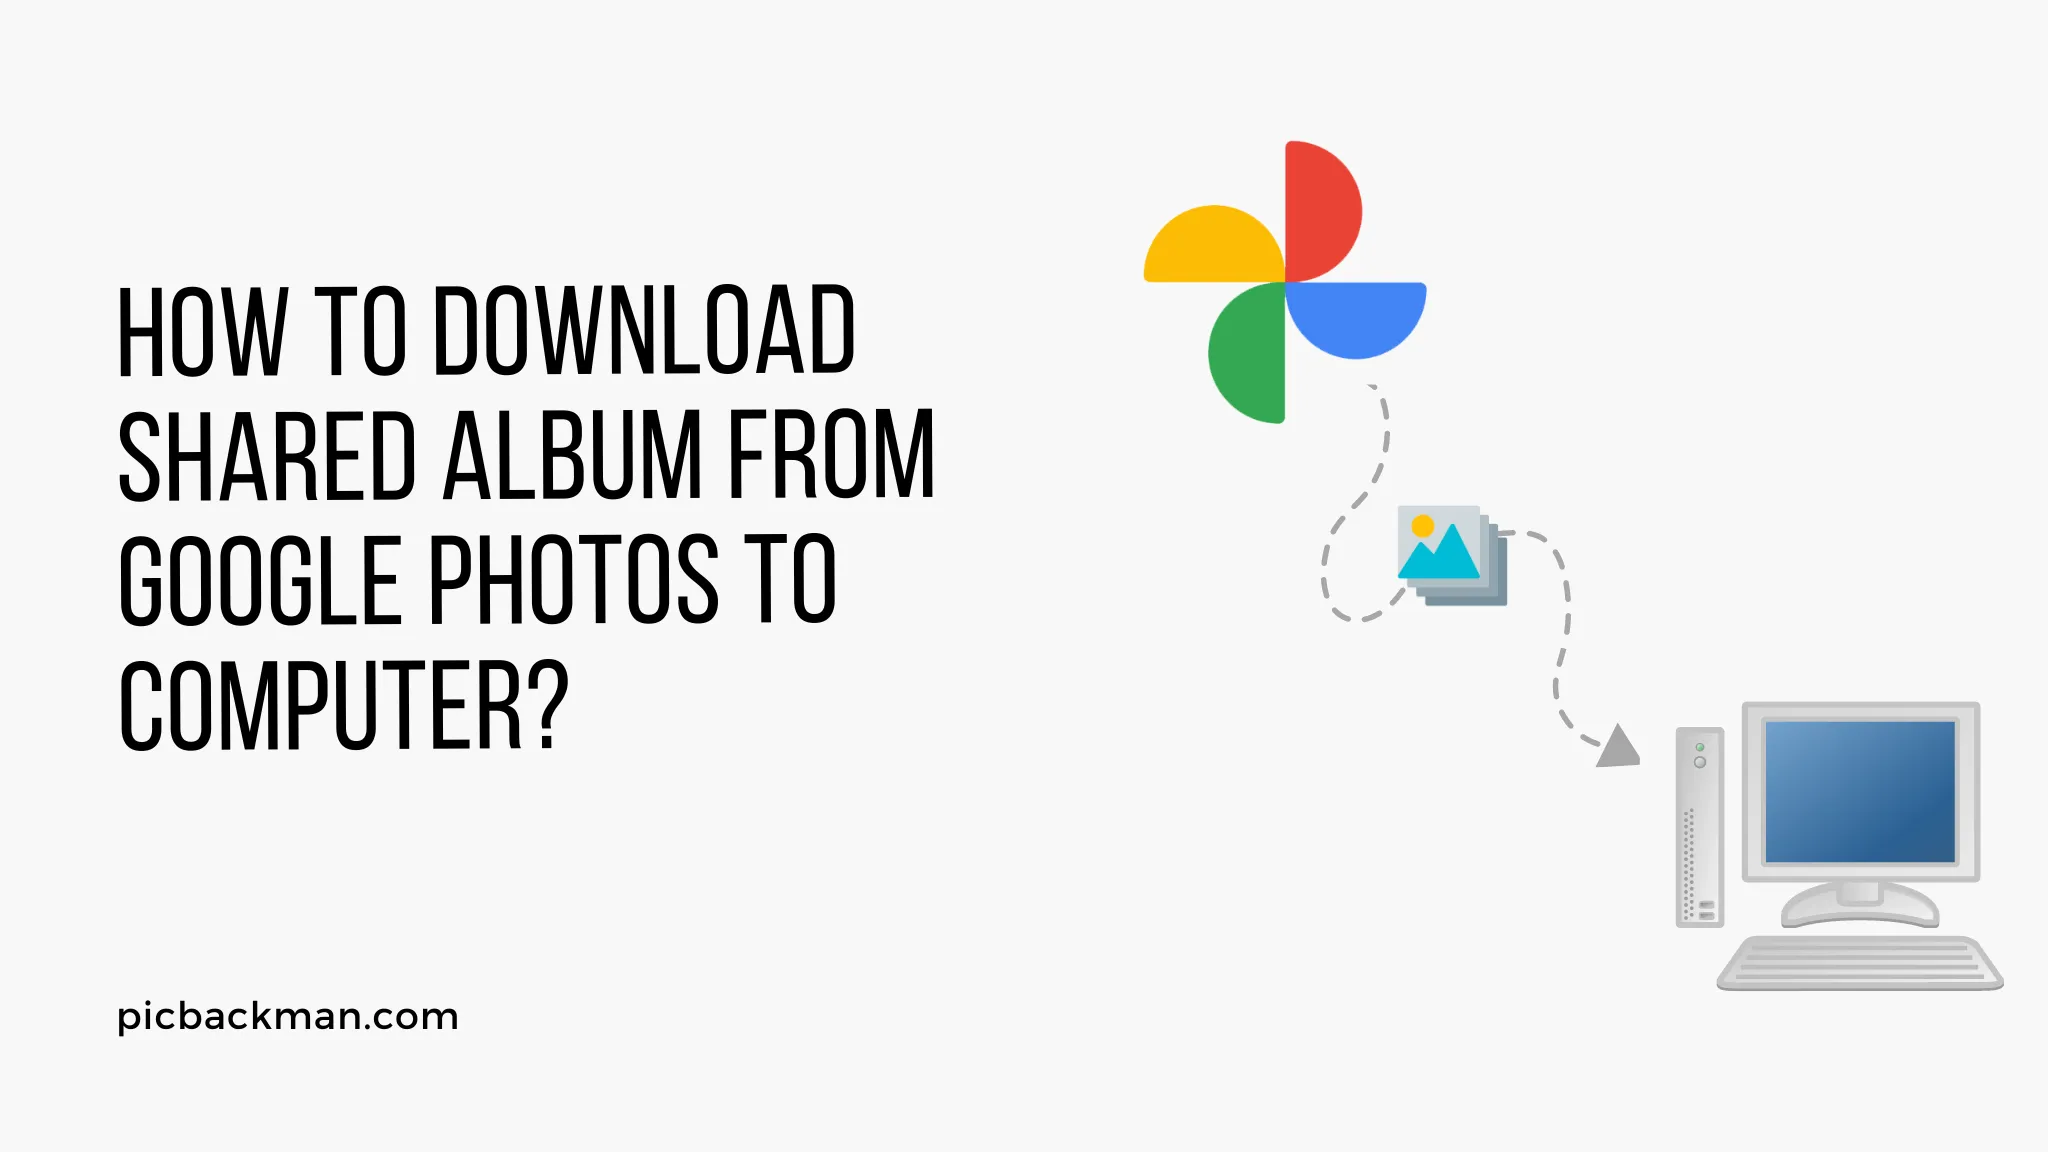 How to Download Shared Album from Google Photos to Computer?